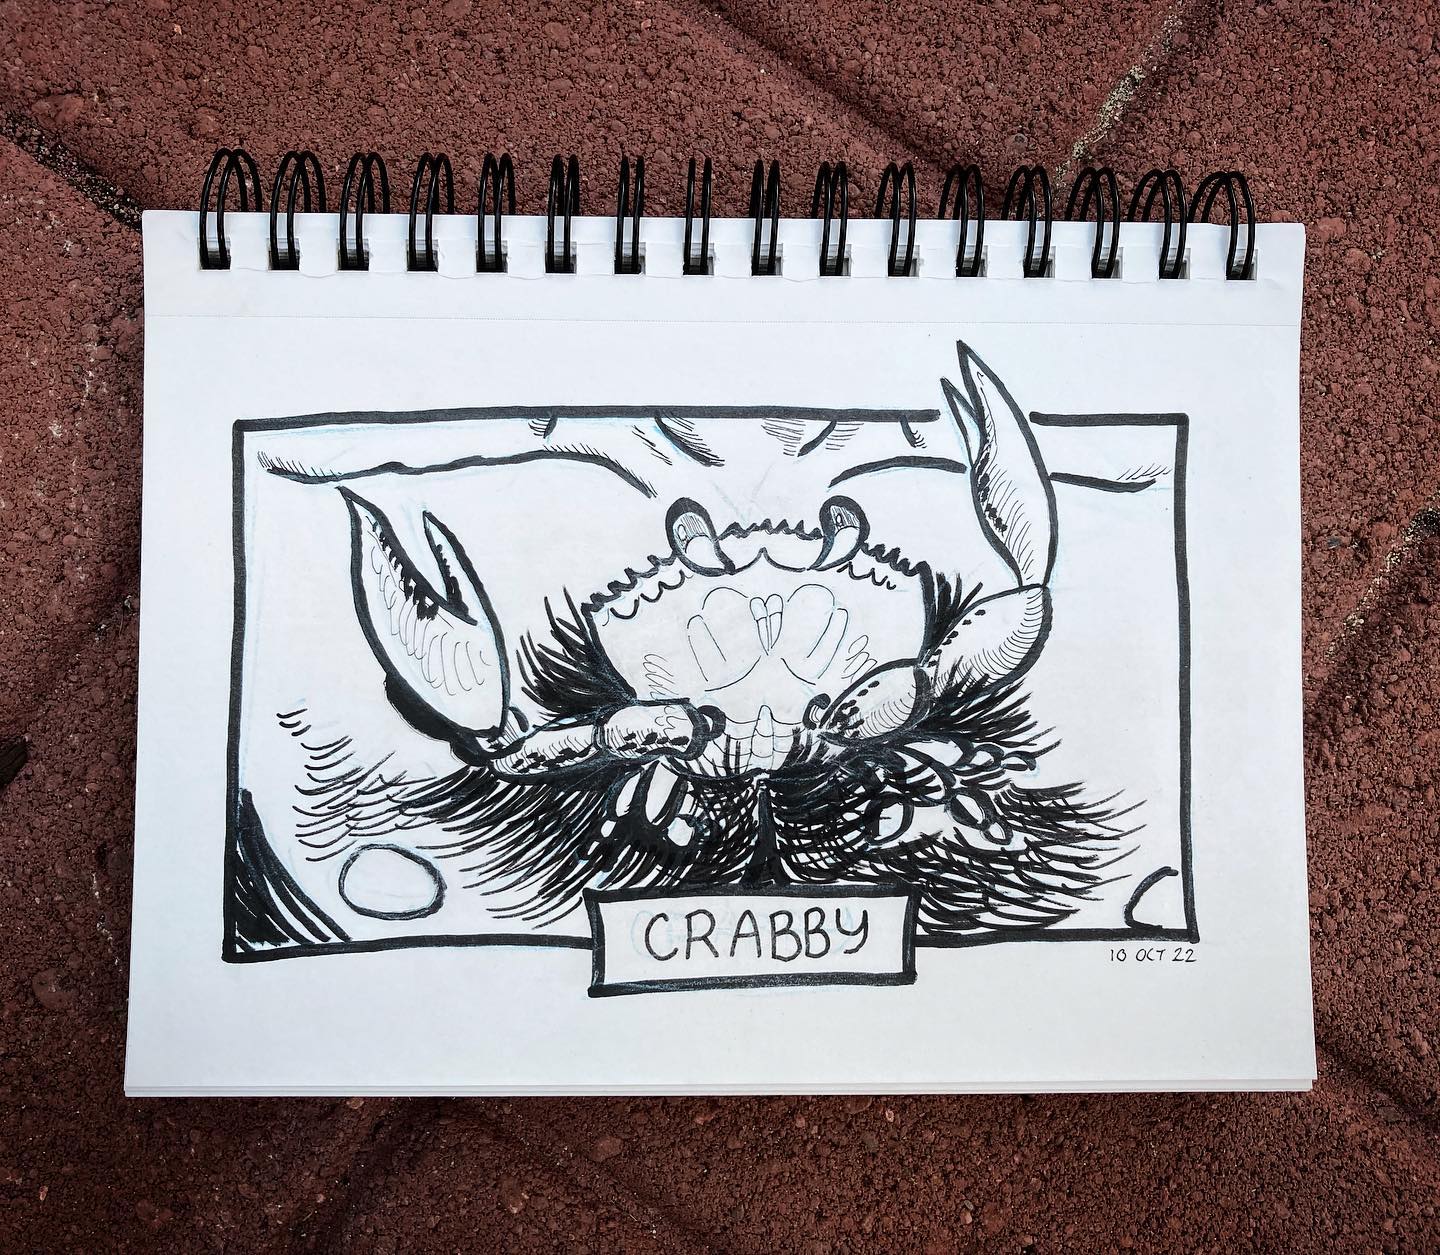 Inktober day 10: crabby
_____________
Based on actual events. 
_____________
#inktober2022crabby #inktober2022 #inktober #inkillustration